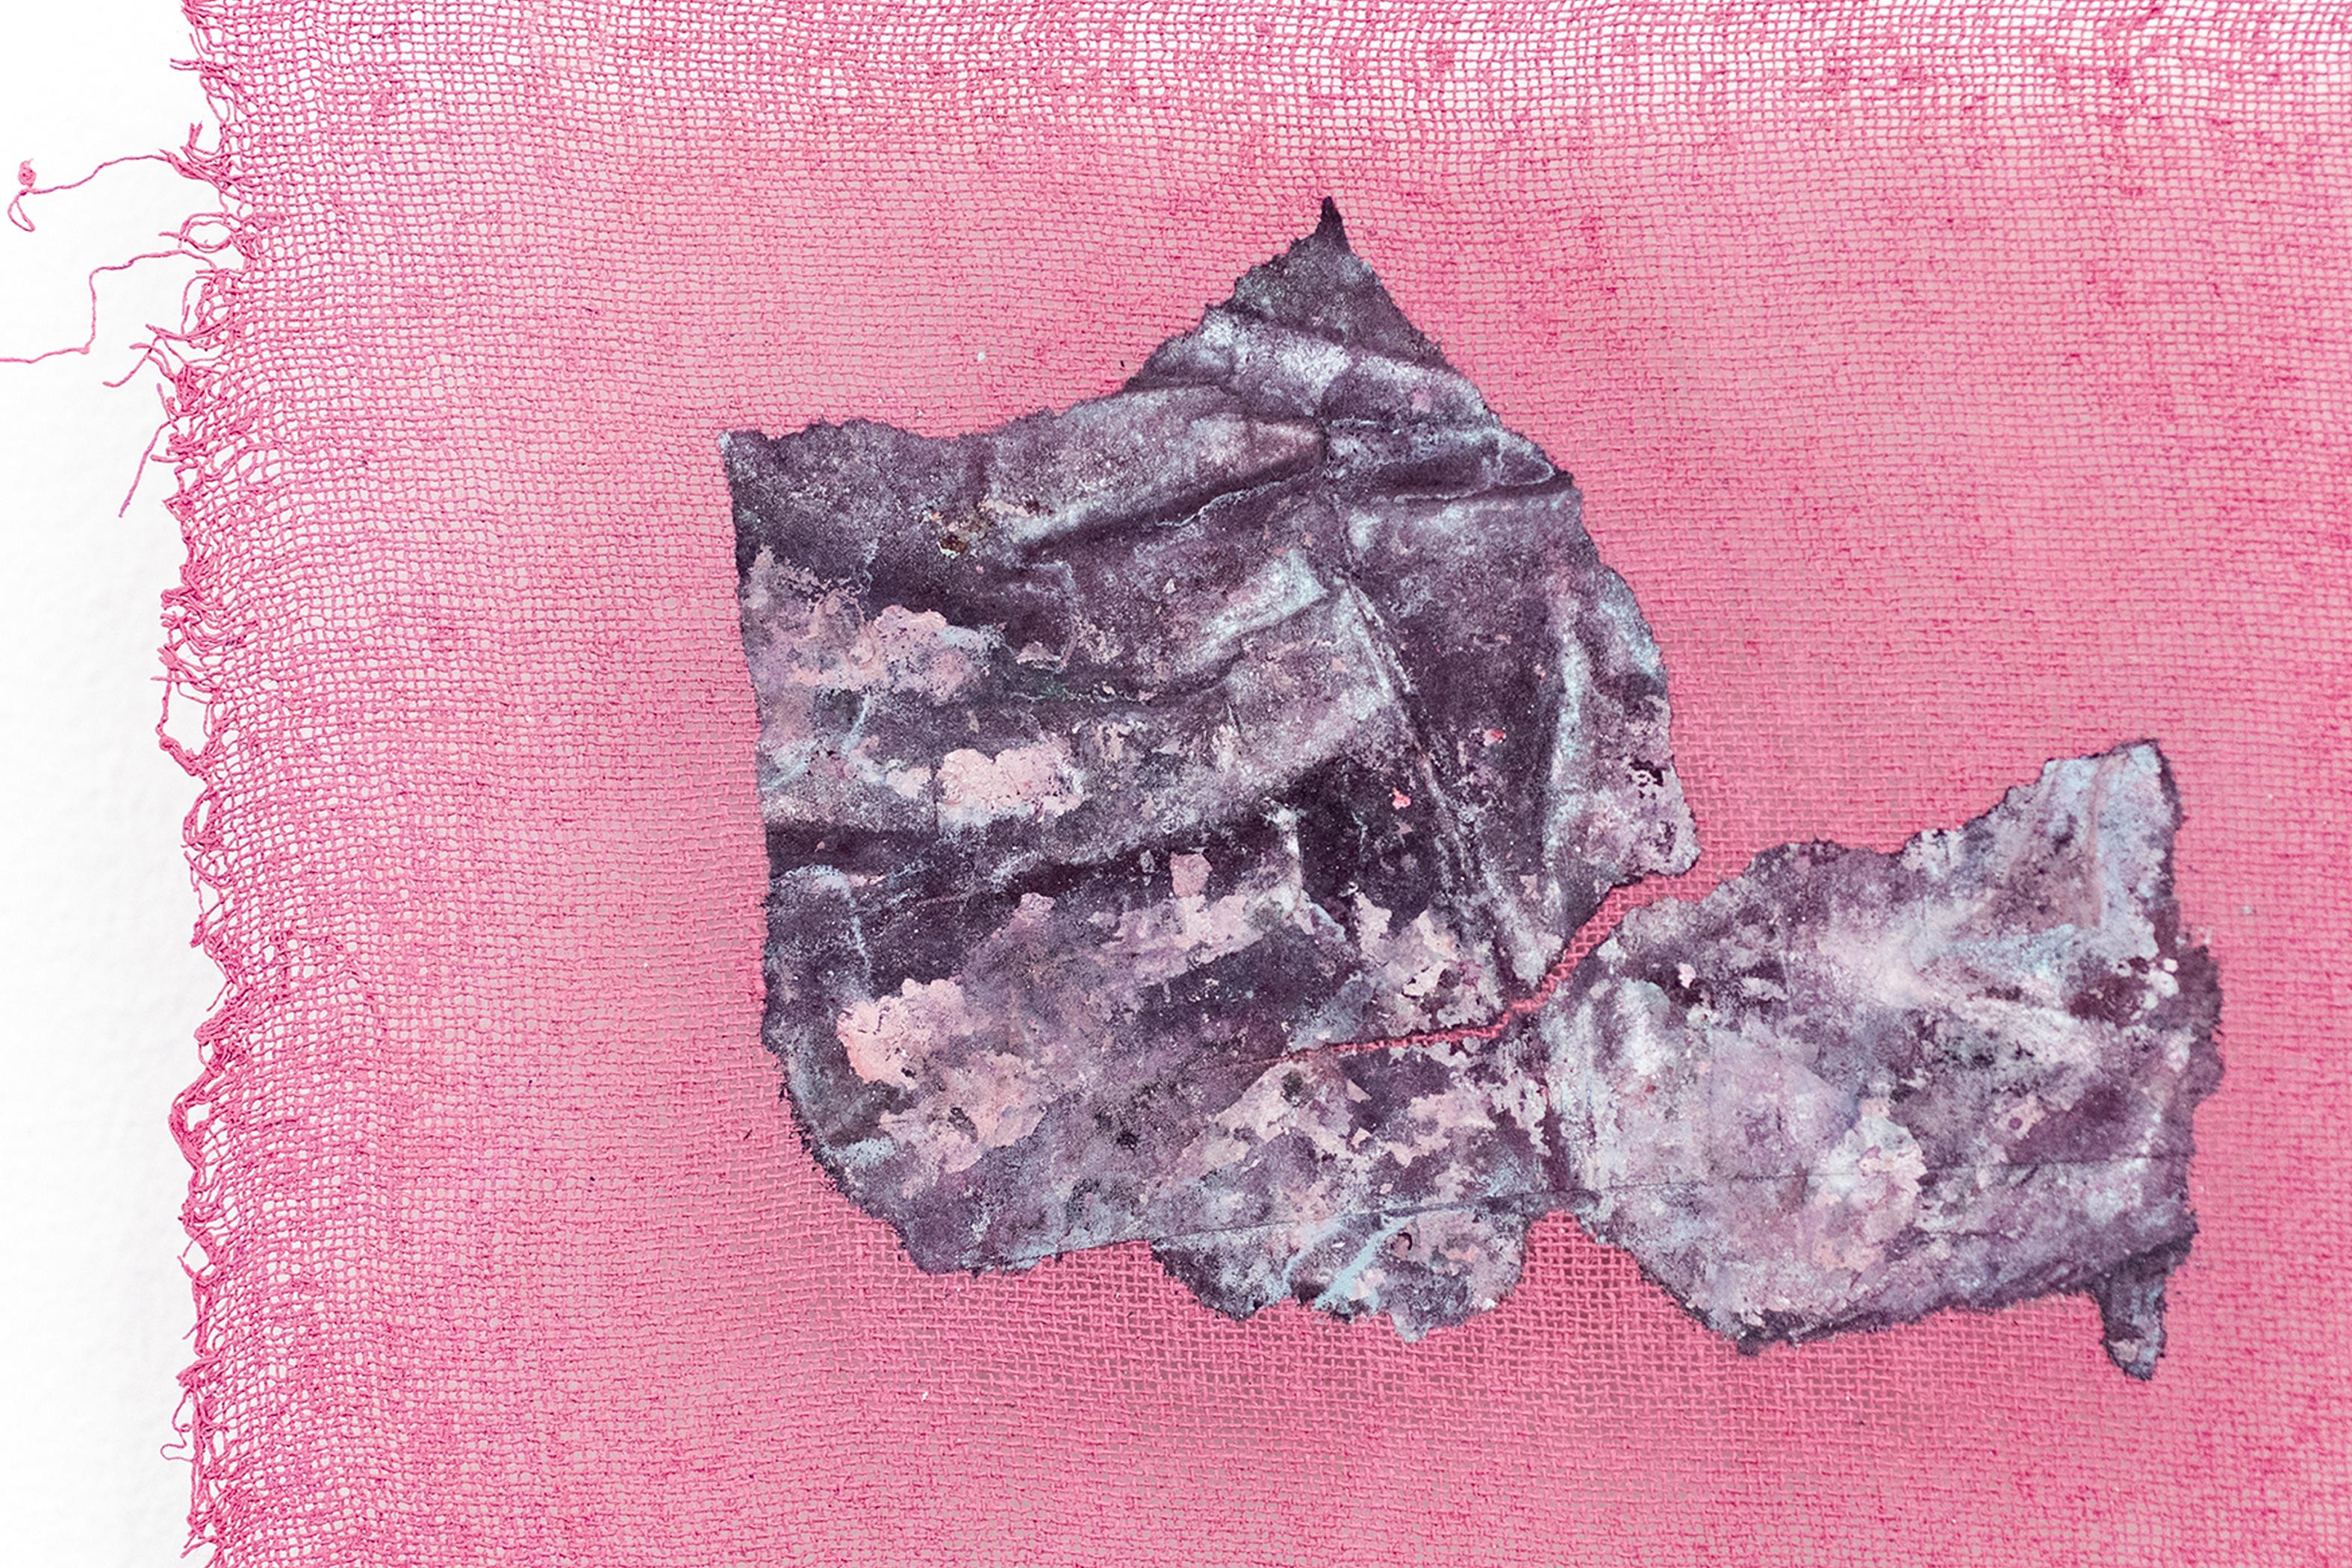 Flesh, Mulberry paper and acrylic on gauze 2